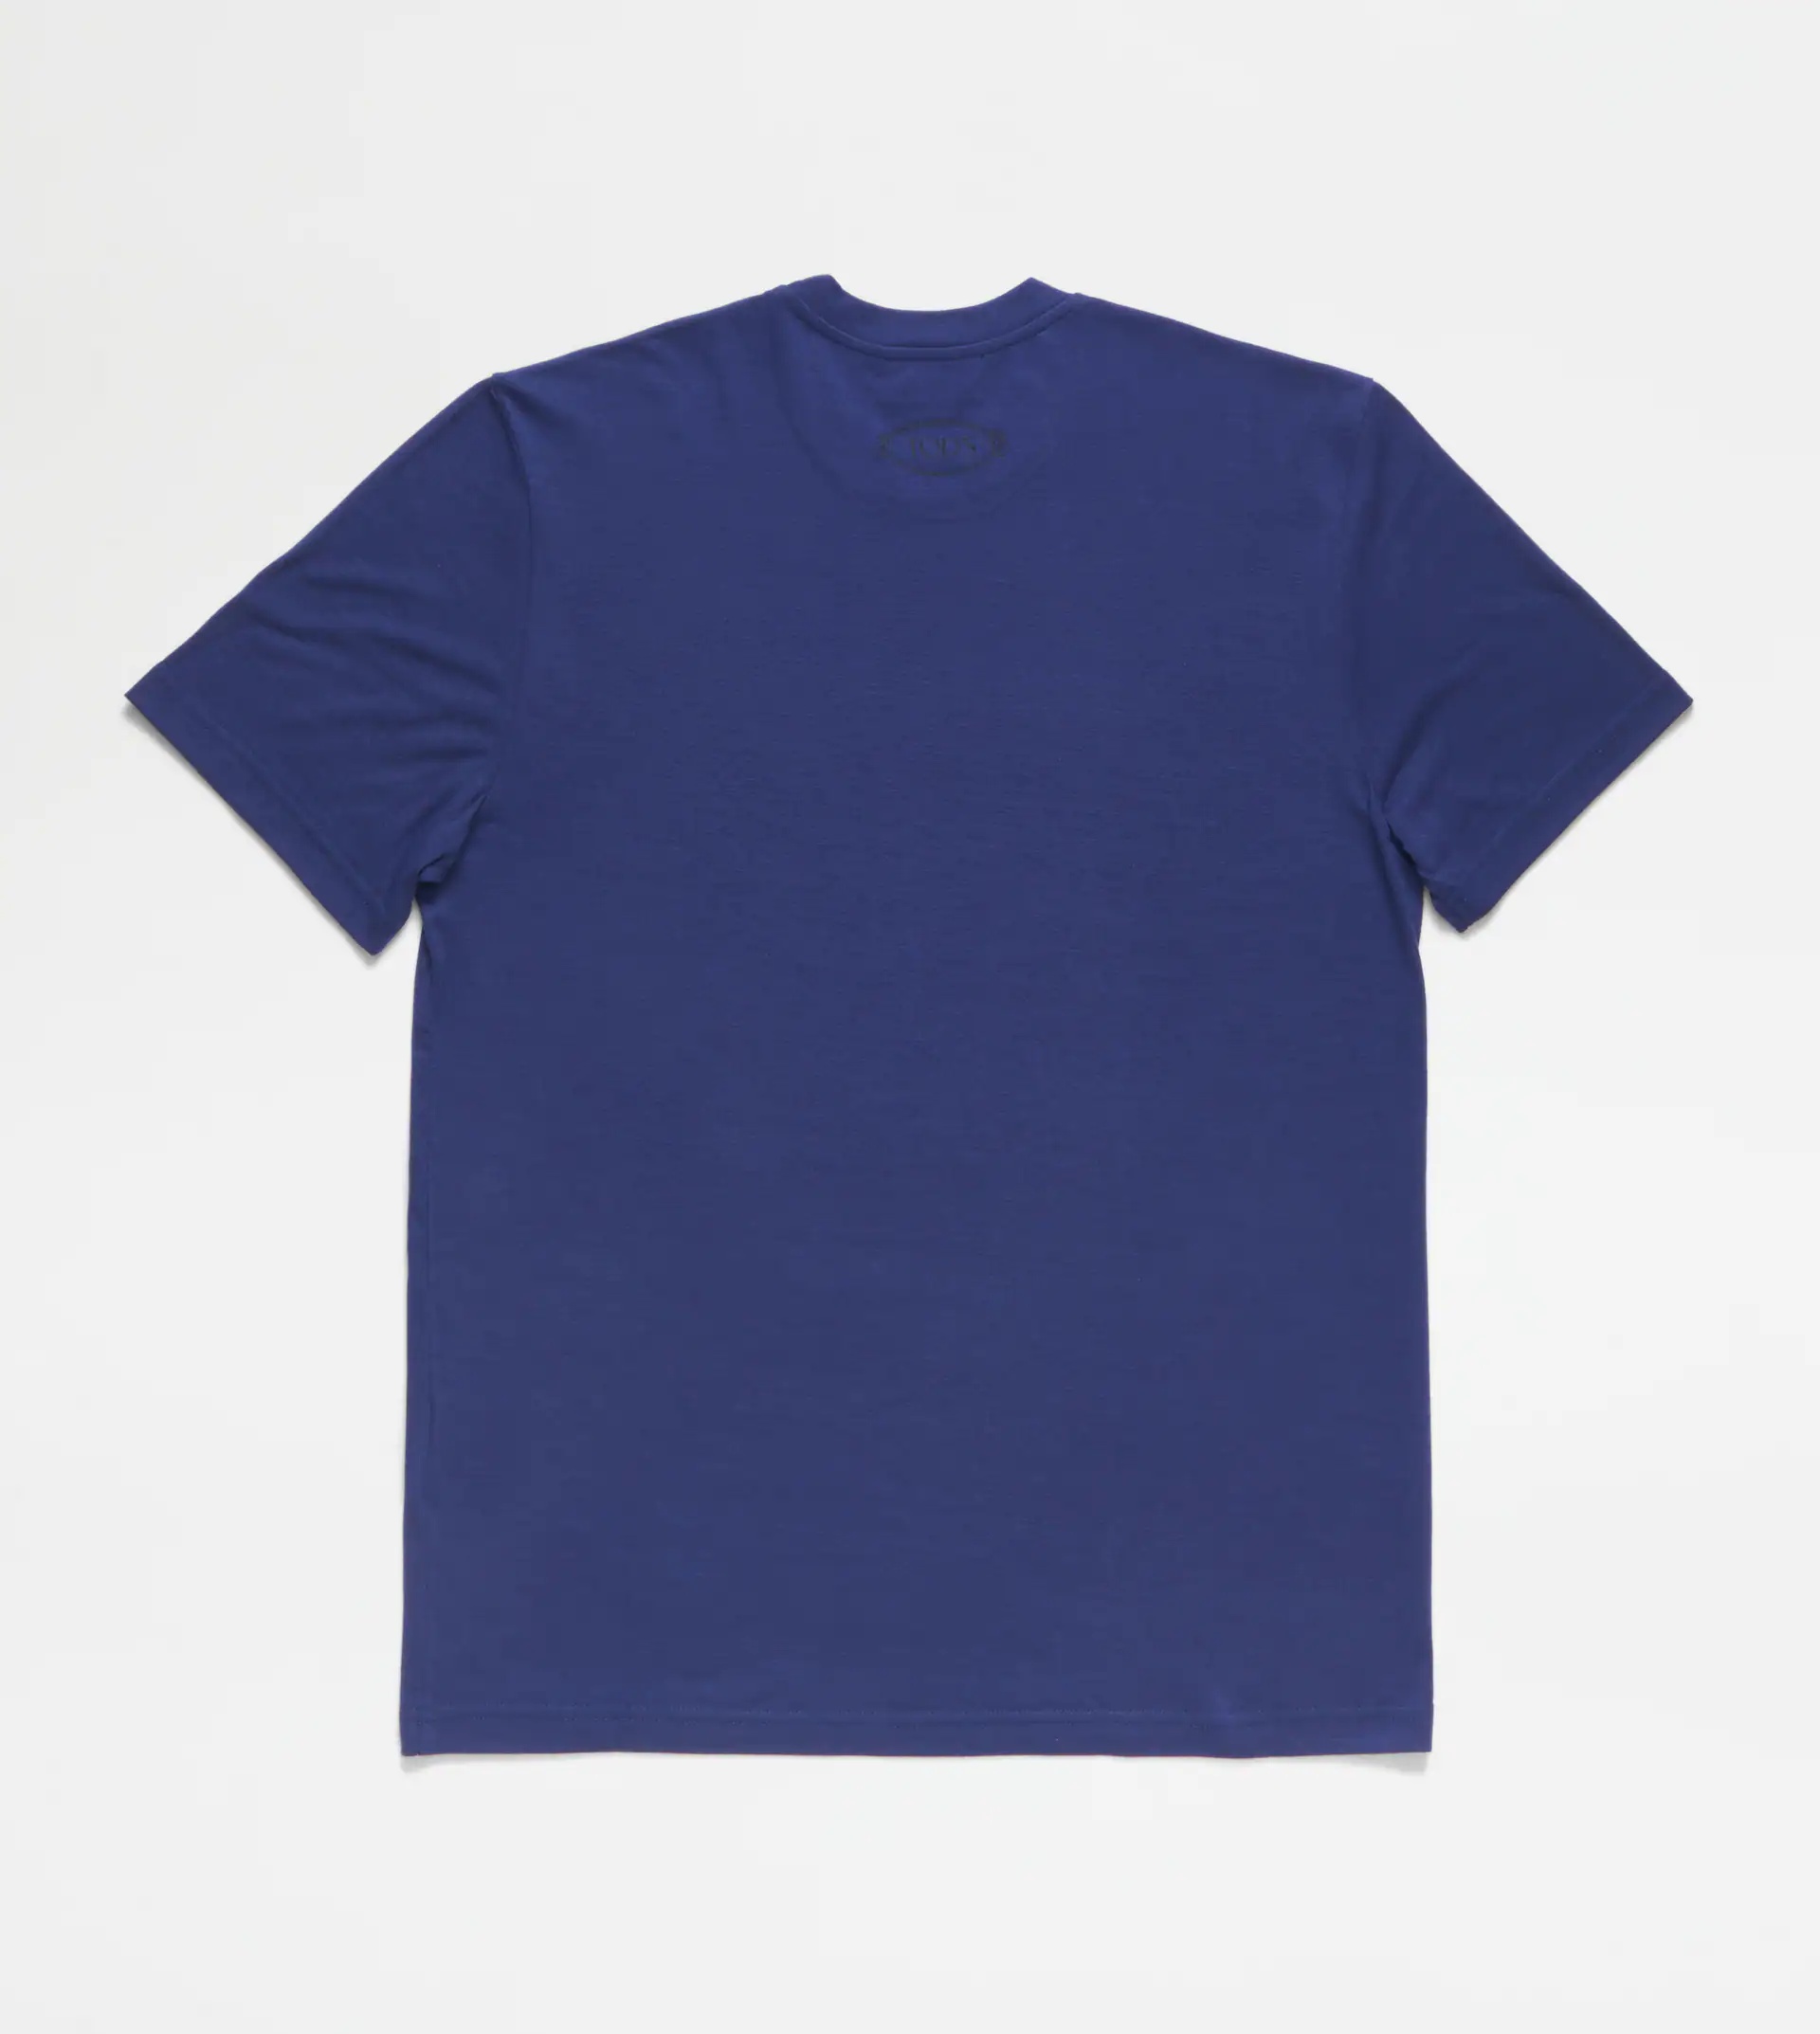 T-SHIRT MADE BY HUMANS - BLUE - 4